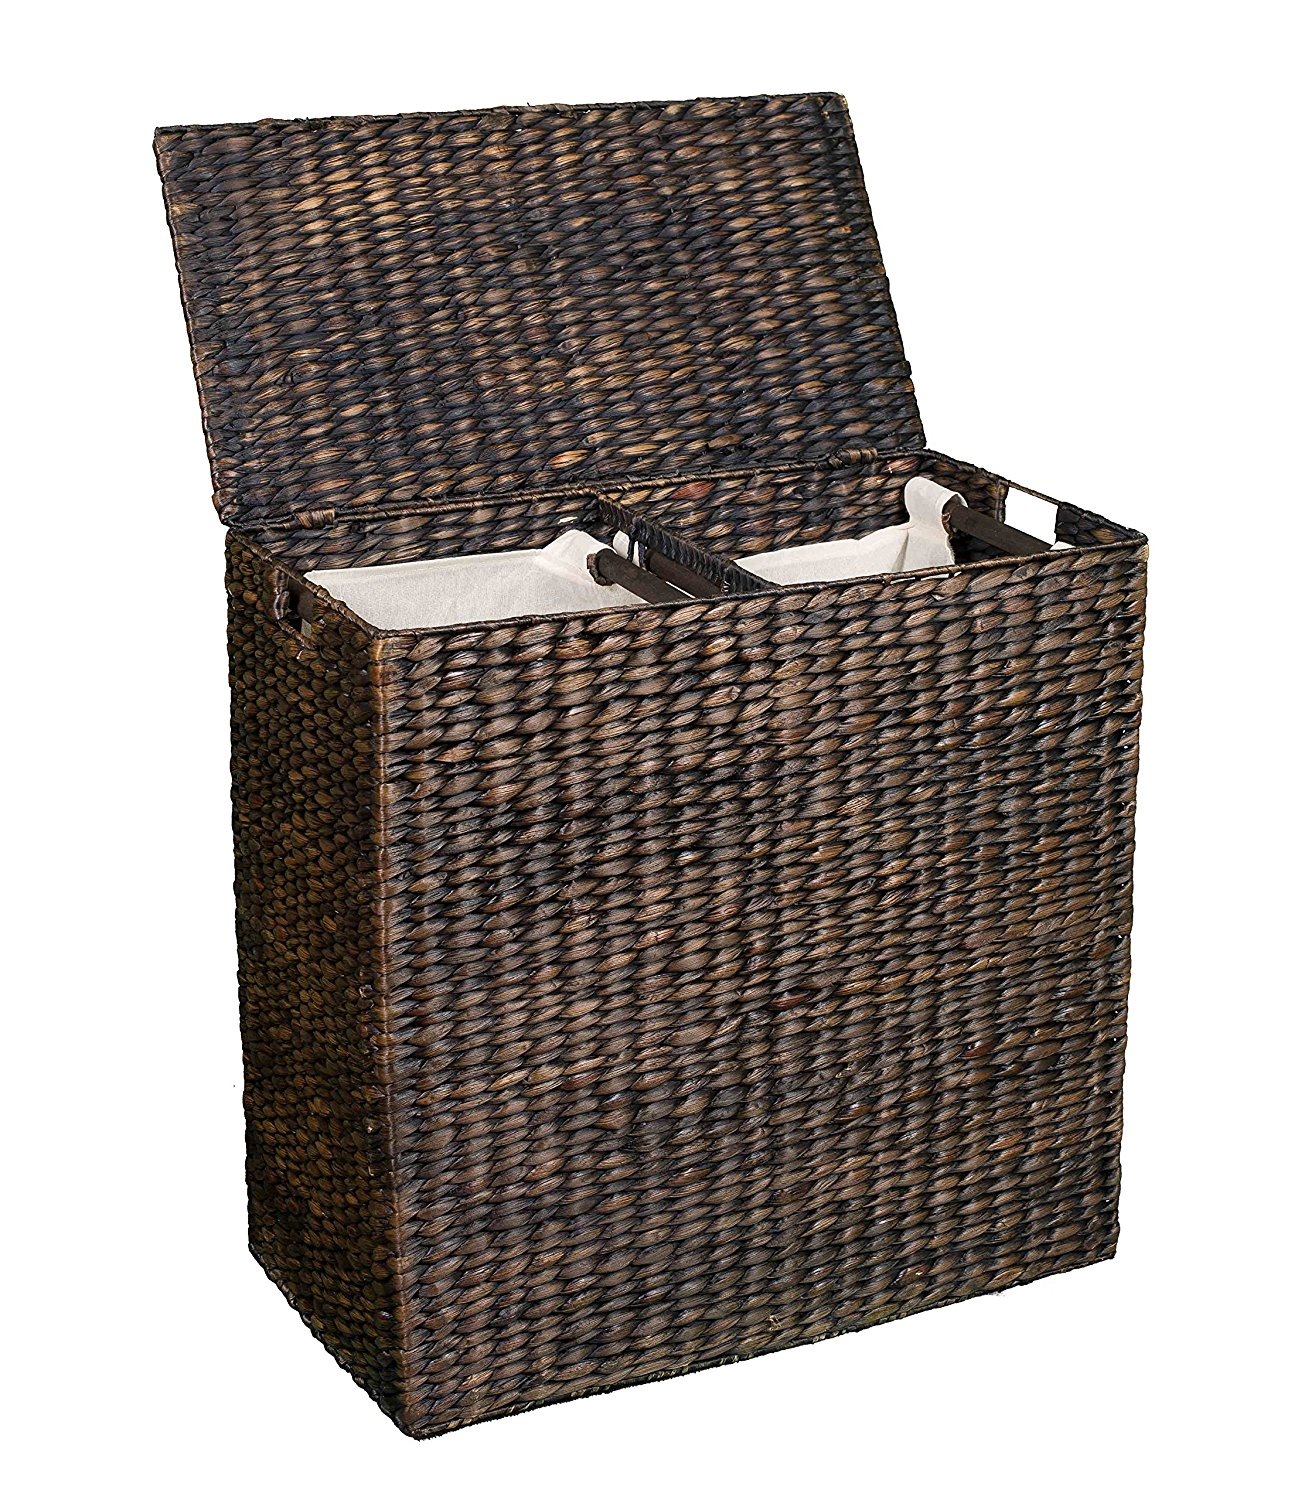 BirdRock Home Water Hyacinth Laundry Hamper Divided Interior (Espresso) | Eco-Friendly | Made of Hand Woven Hyacinth Fibers | Includes Two Removable Cotton Liners Bag | Wicker Laundry Basket with Lid